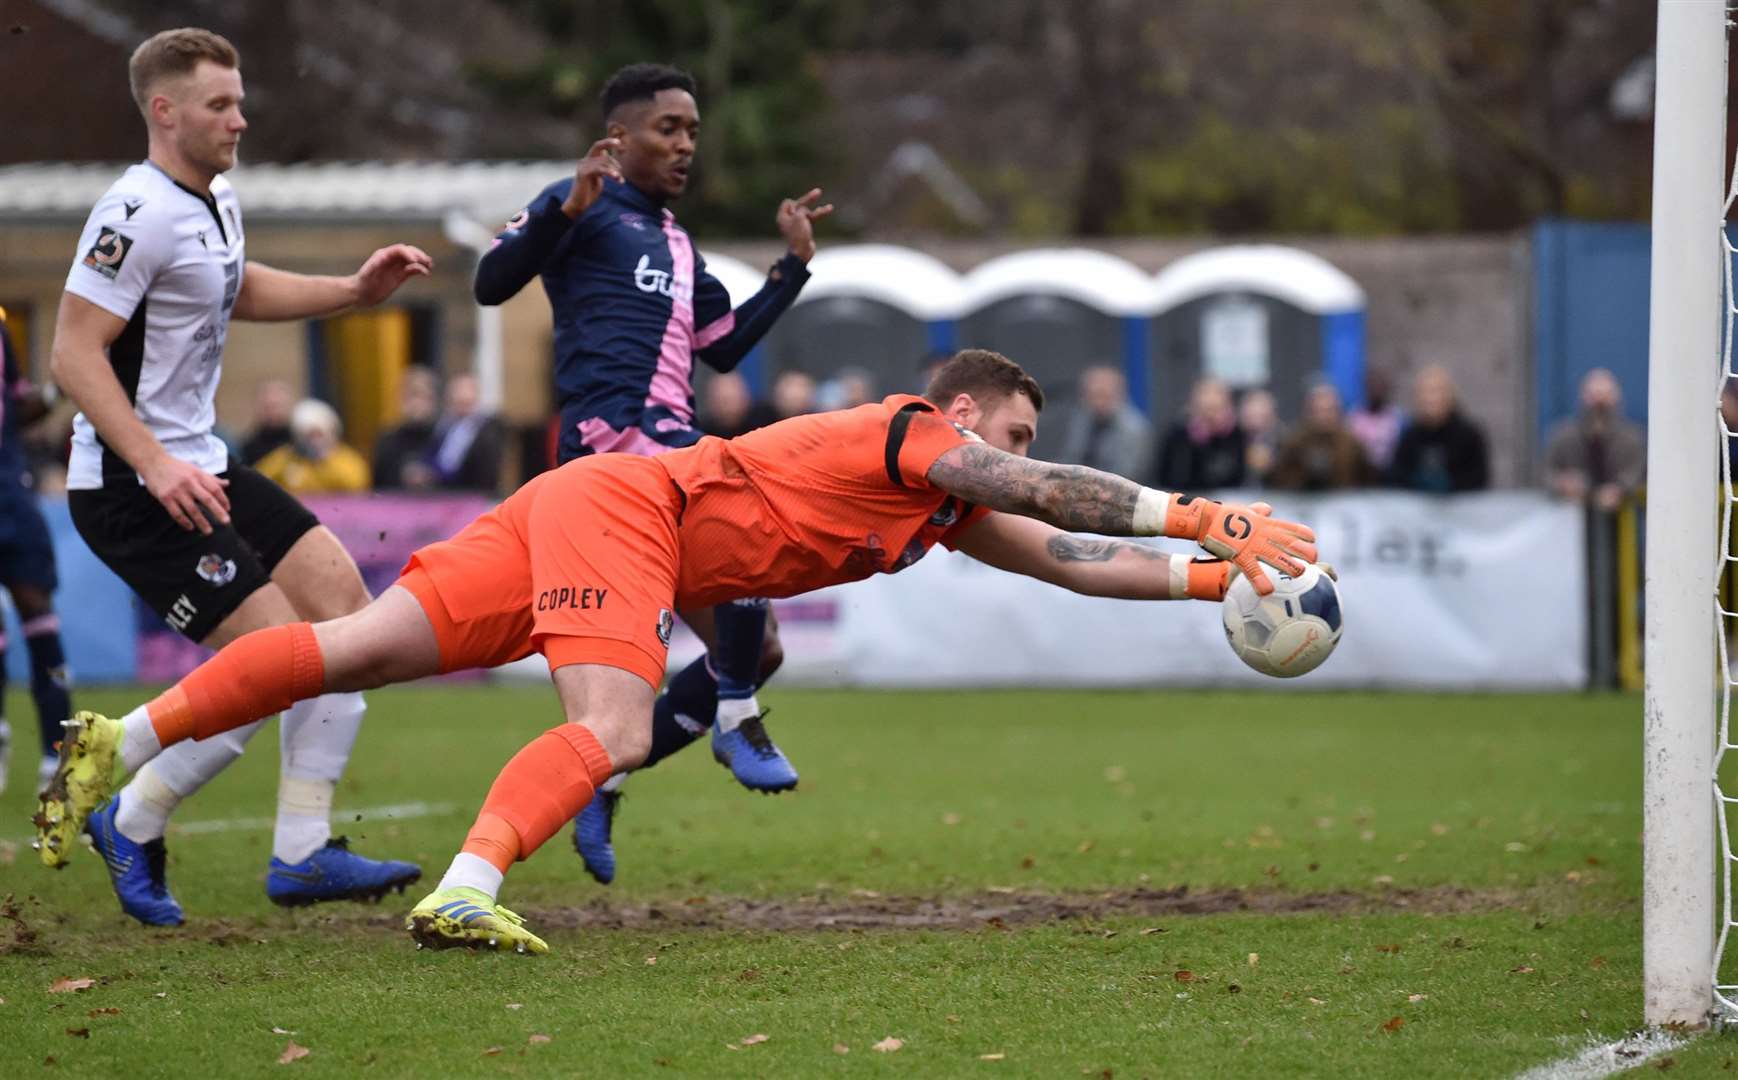 Dartford keeper Mark Smith recovers to save at the second attempt against Dulwich. Picture: Keith Gillard